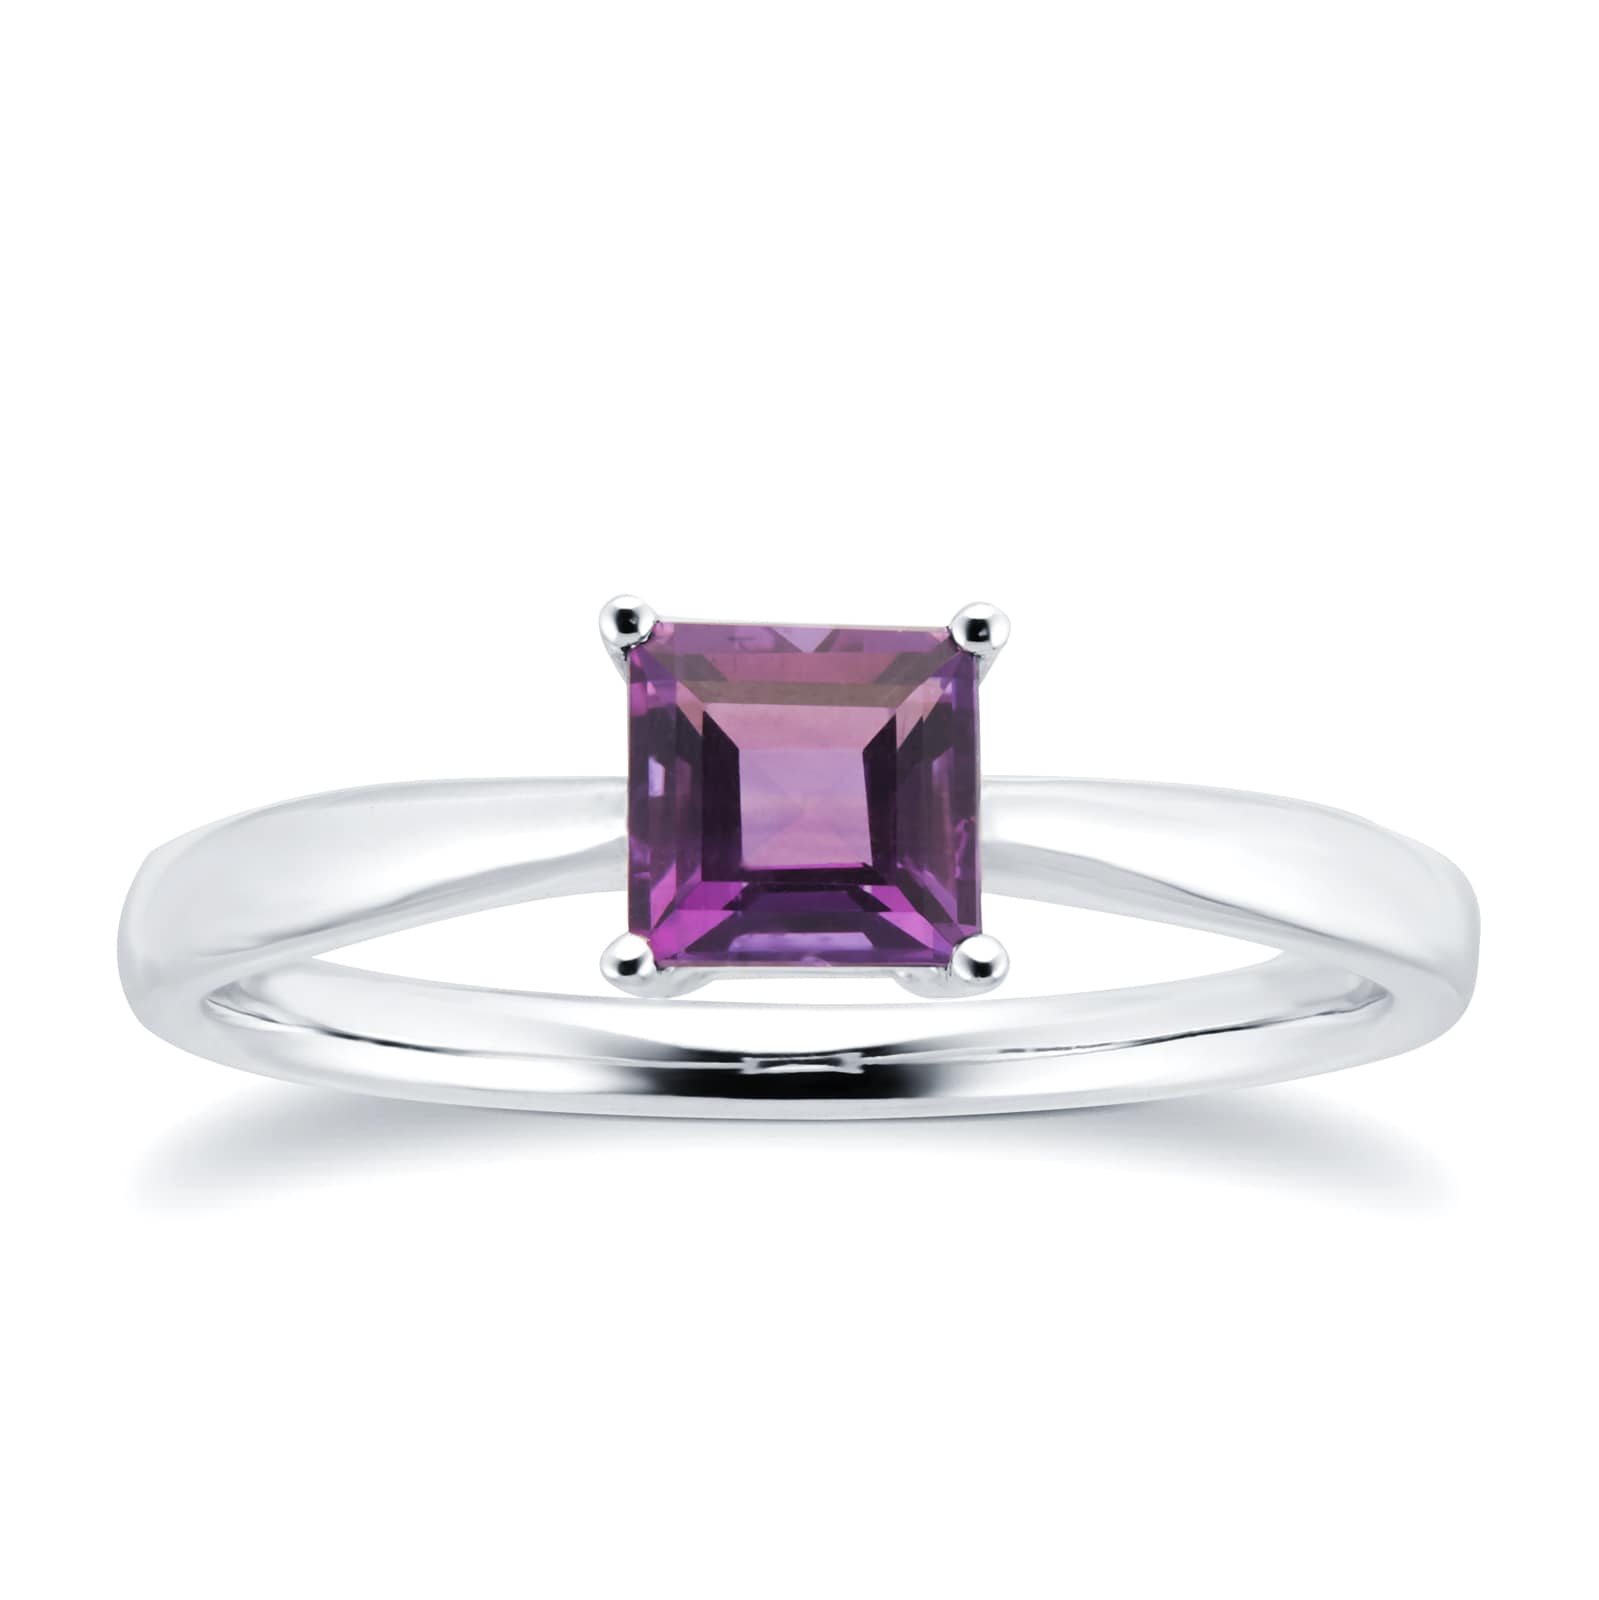 9ct White Gold 4 Claw Square Amethyst 5mm x 5mm Ring- Ring Size A.5